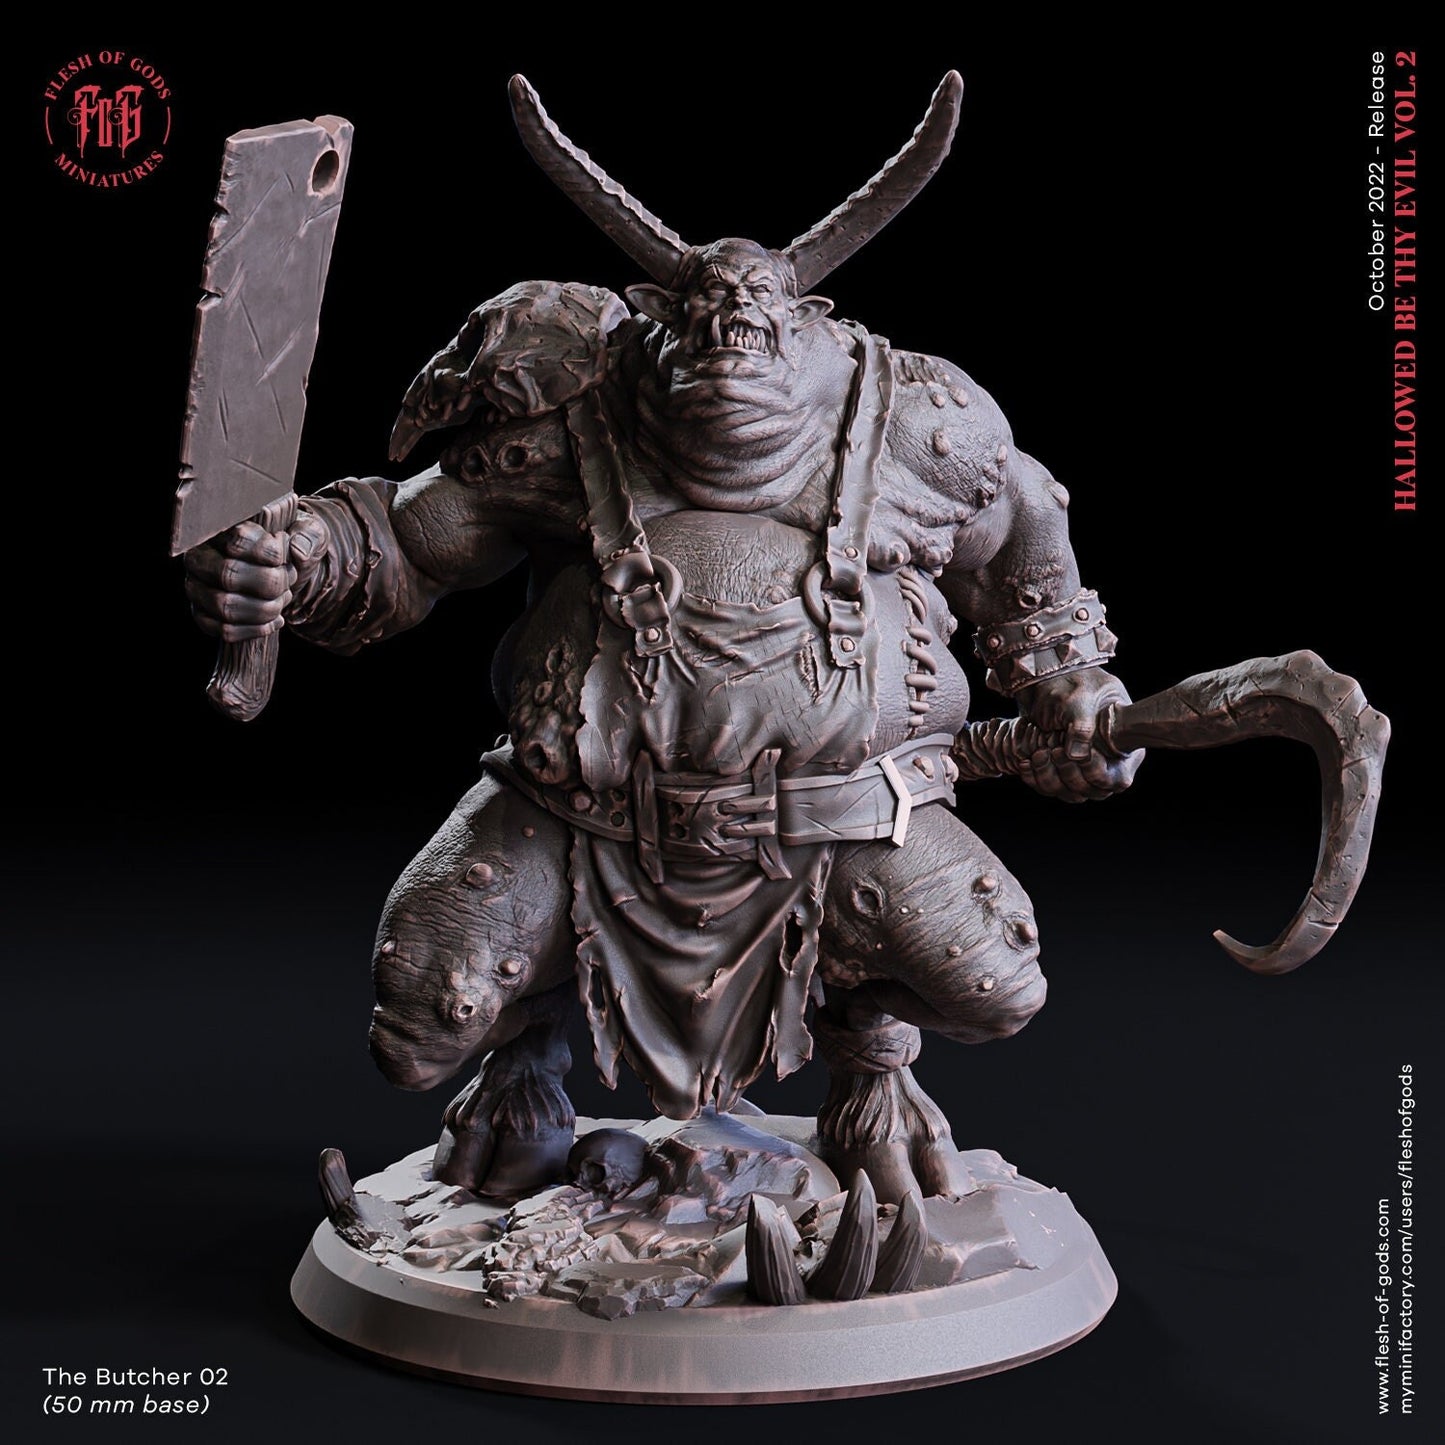 The Butcher 02 | Flesh of Gods | Enemy | 3D Printed Resin Miniature | Dungeons and Dragons | Pathfinder | Tabletop Role Playing | D&D